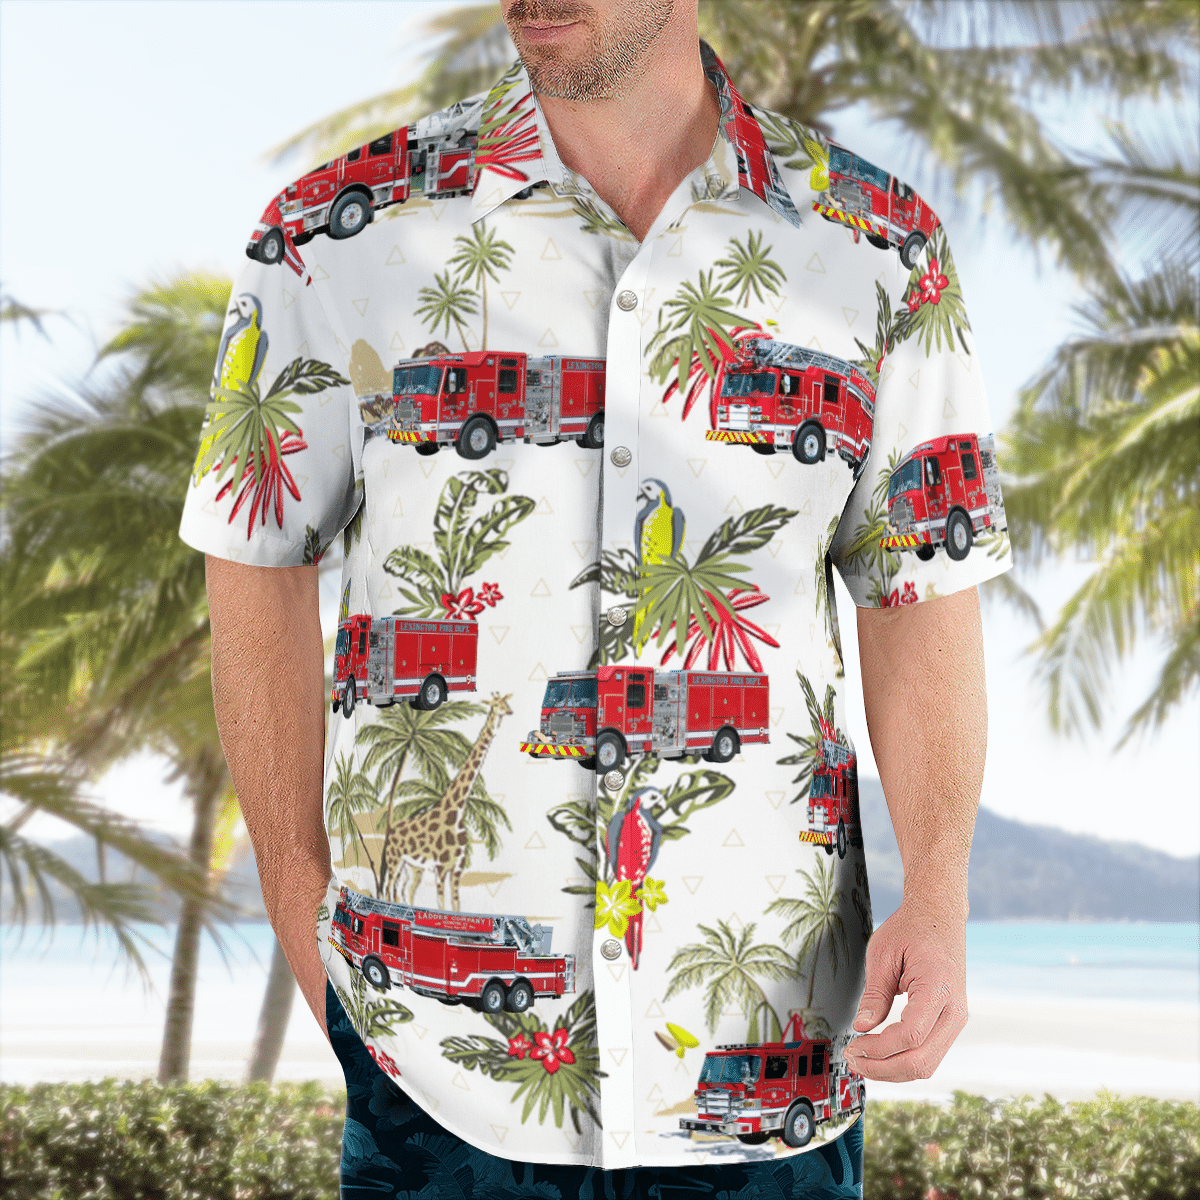 There are several styles of beach and Hawaiian shorts and tops to choose from 140